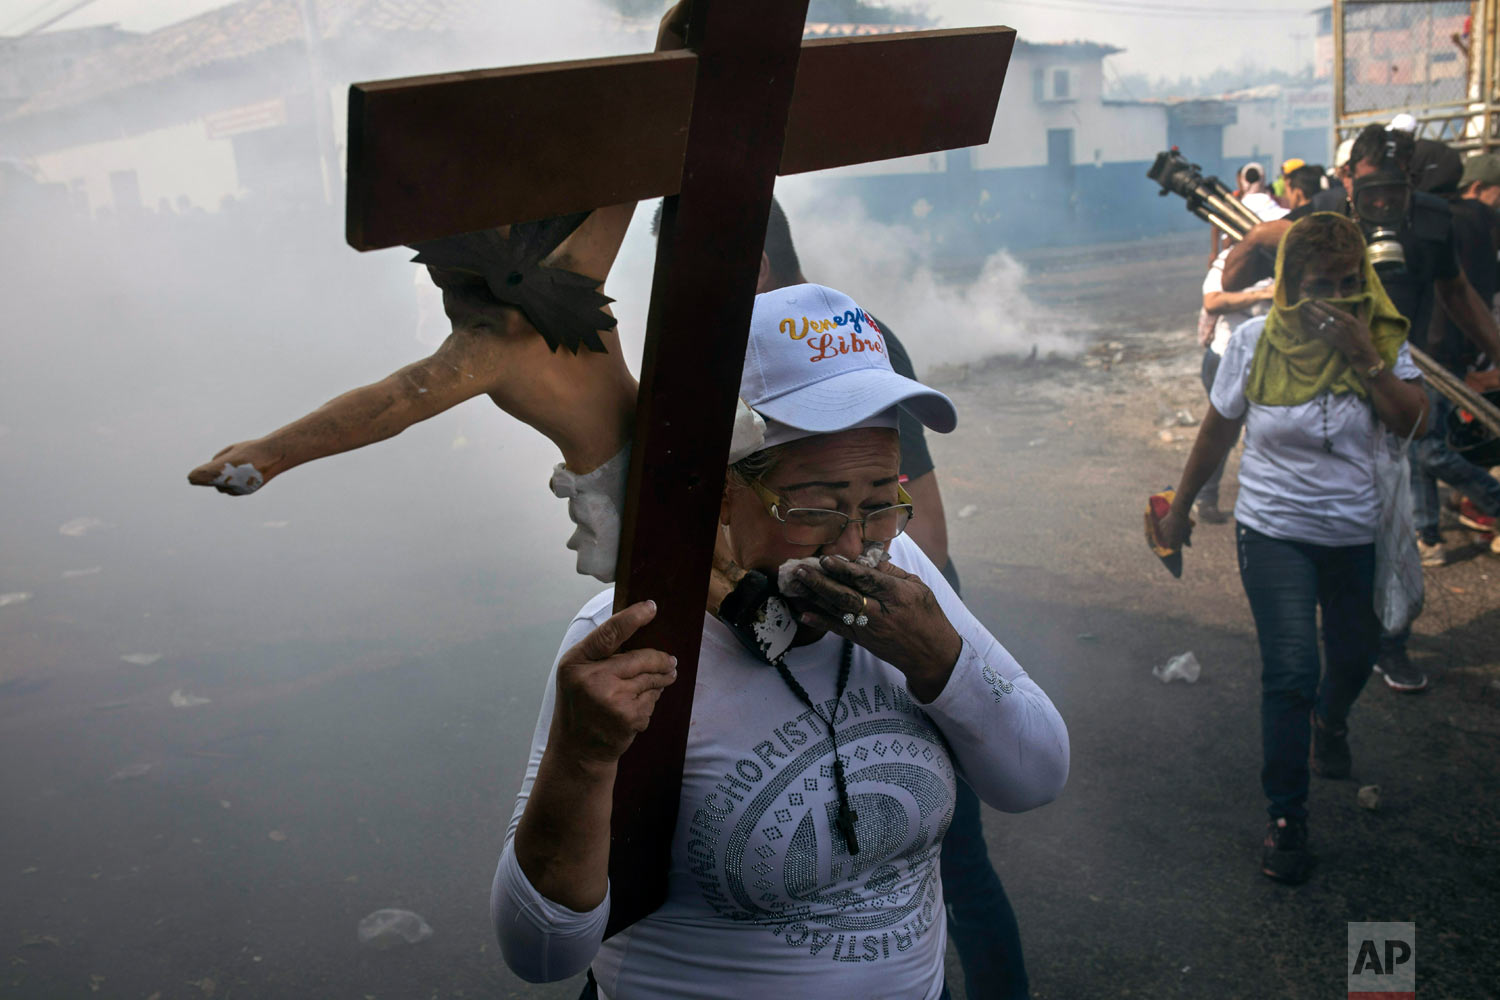  A woman carries a cross amid tear gas during clashes between the opposition and the Venezuelan Bolivarian National Guard in Urena, Venezuela, near the border with Colombia, Saturday, Feb. 23, 2019. (AP Photo/Rodrigo Abd) 